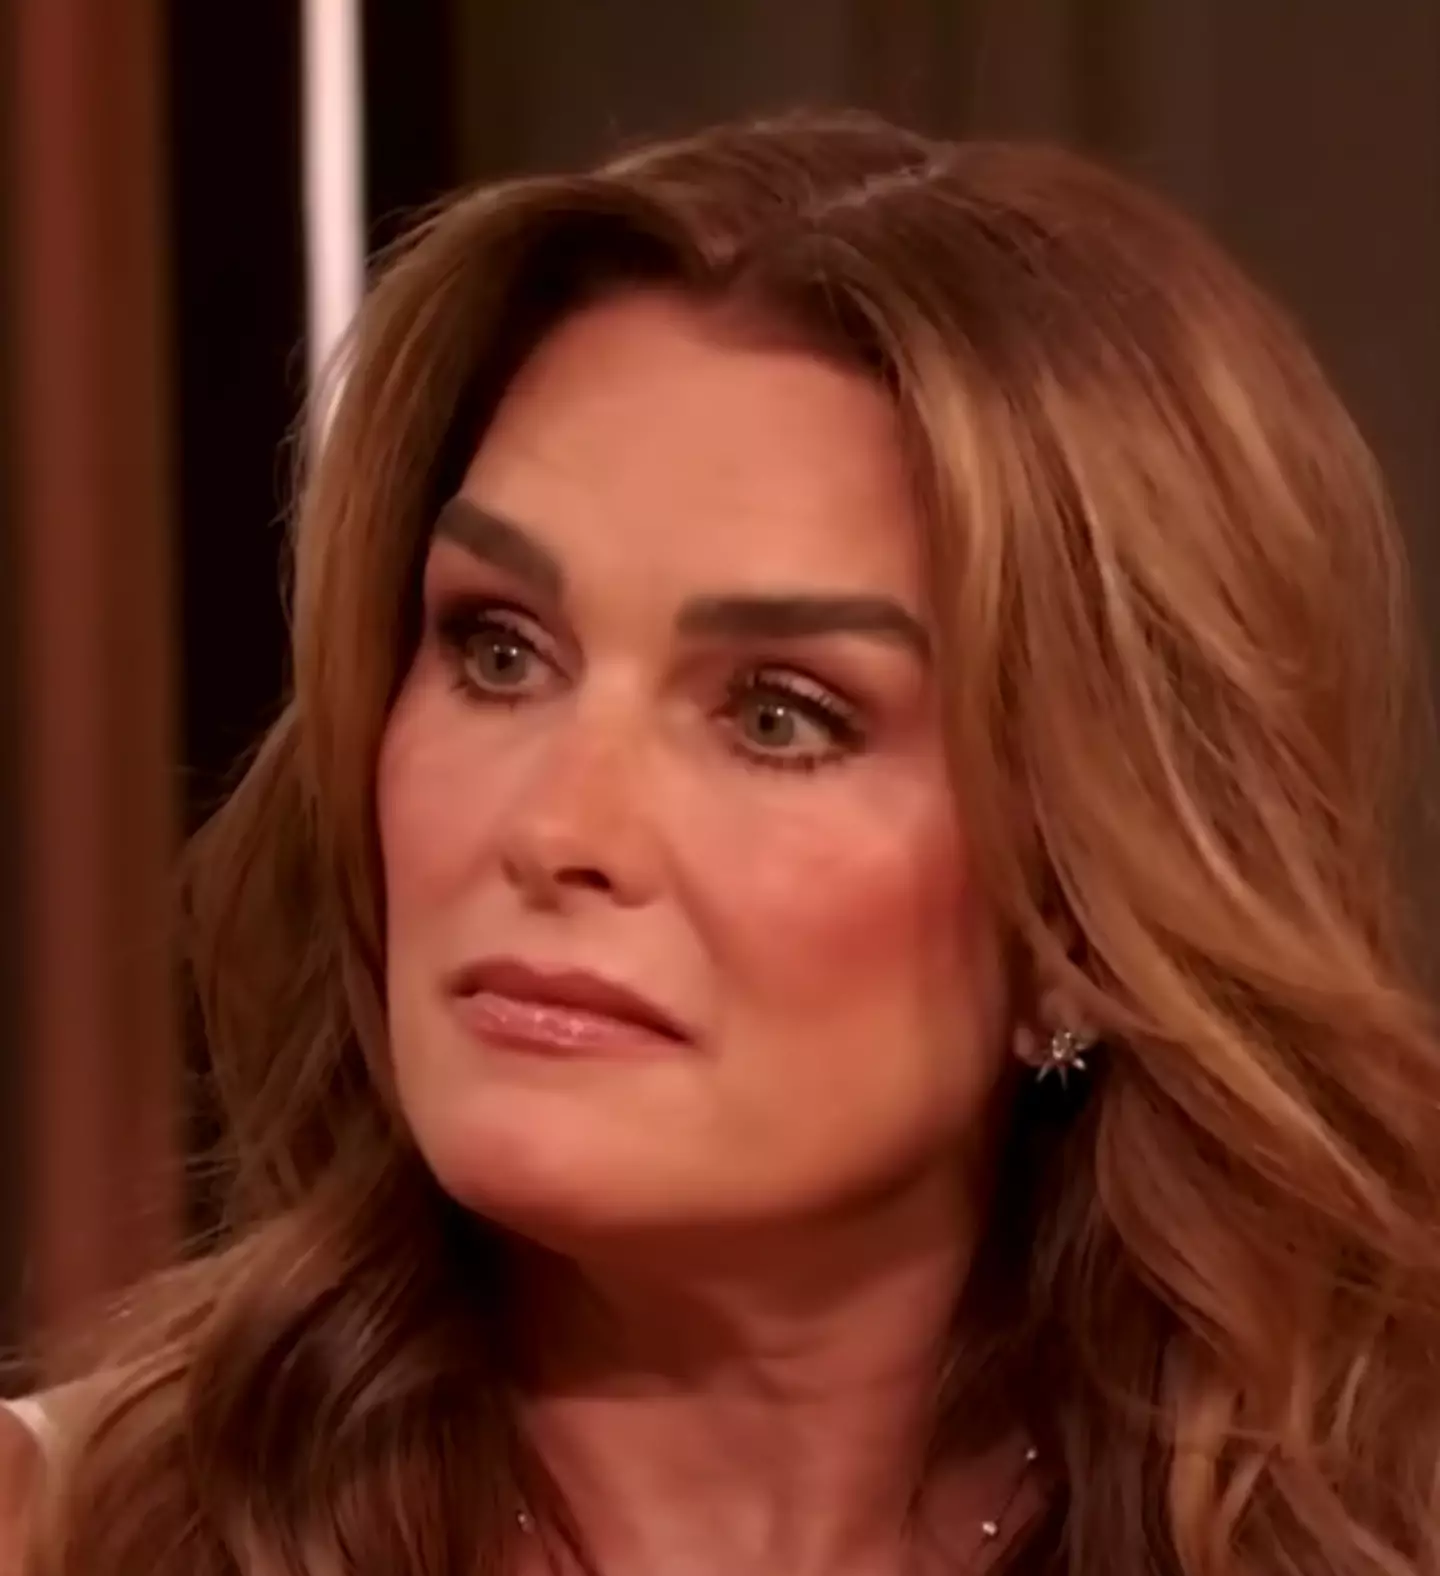 Brooke Shields spoke openly about her relationship with her mom.